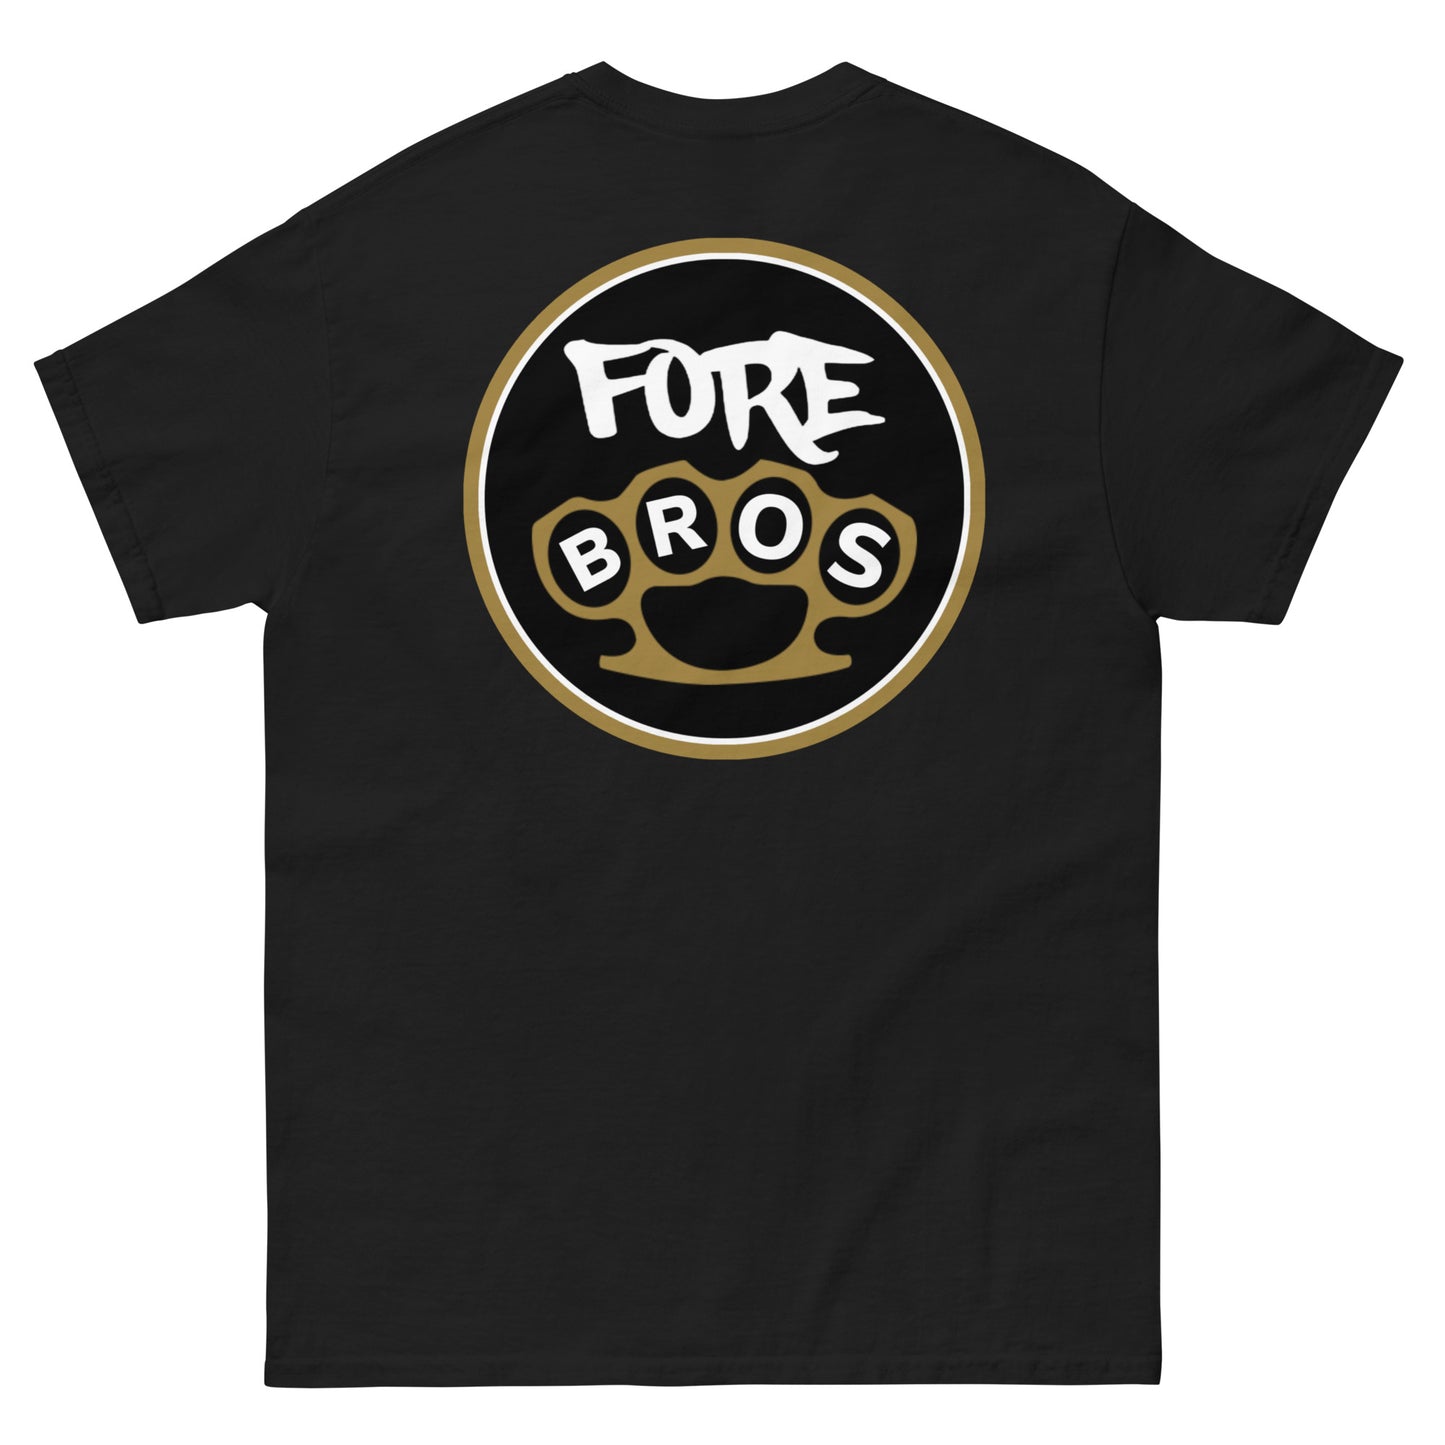 ForeBros Brass Knuckles Tee